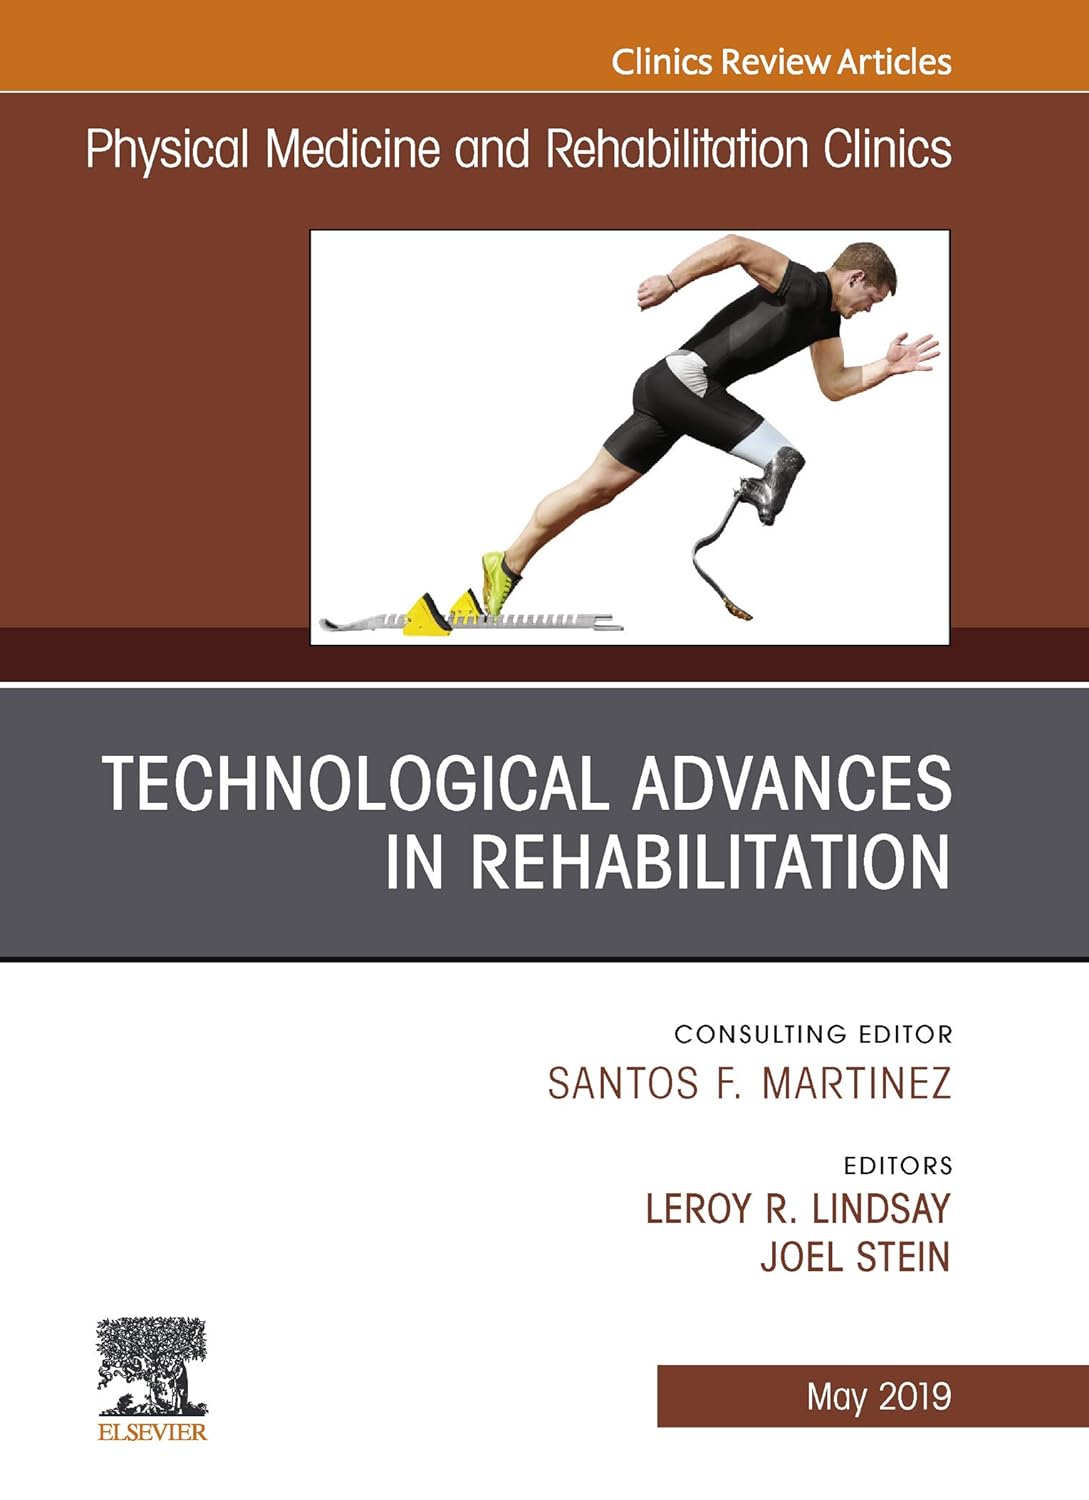 Technological Advances in Rehabilitation, An Issue of Physical Medicine and Rehabilitation Clinics of North America (Volume 30-2) (The Clinics: Radiology, Volume 30-2) by Joel Stein 